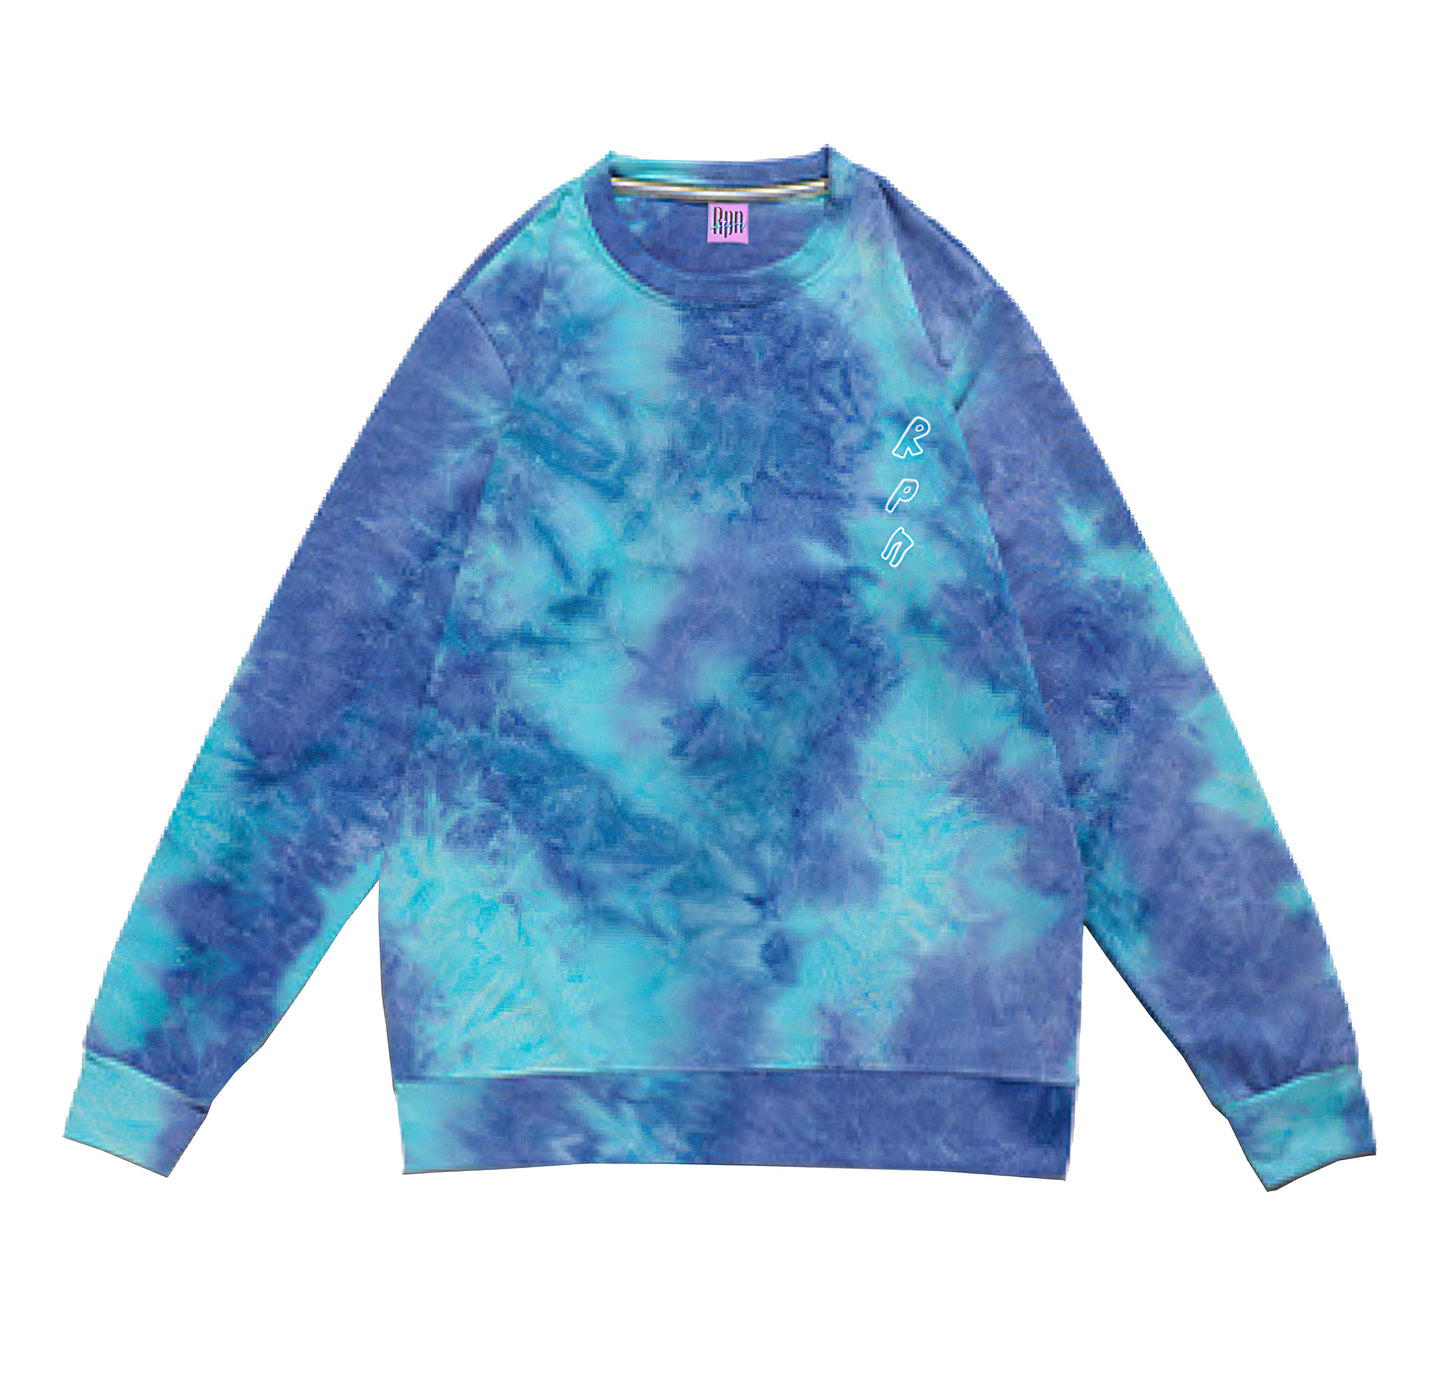 sweatshirt with blue and green tie dye with #misc1 print